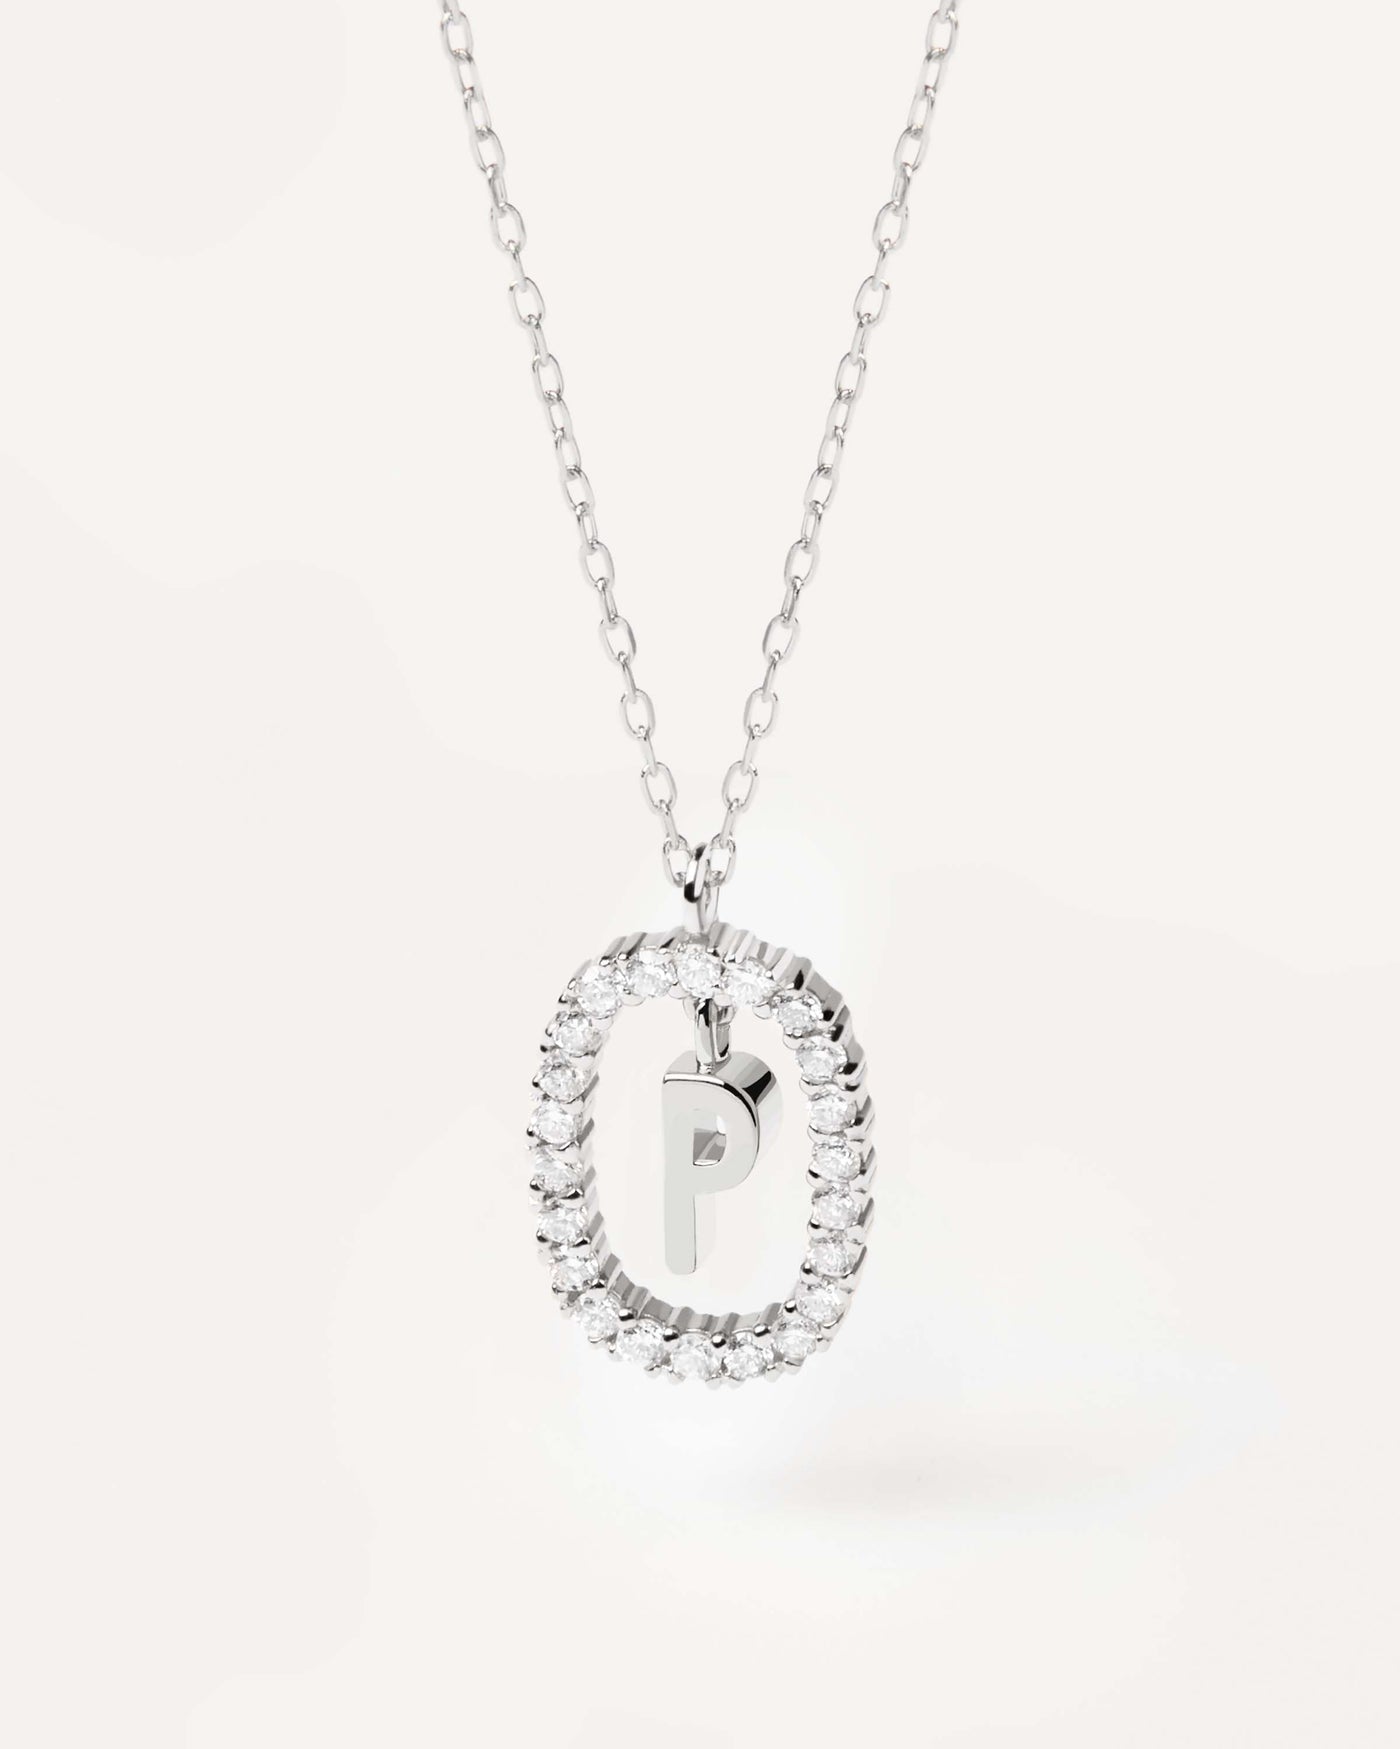 2023 Selection | Diamonds and White Gold Letter P Necklace. Initial P necklace in solid white gold, circled by 0.33 carats lab-grown diamonds. Get the latest arrival from PDPAOLA. Place your order safely and get this Best Seller. Free Shipping.